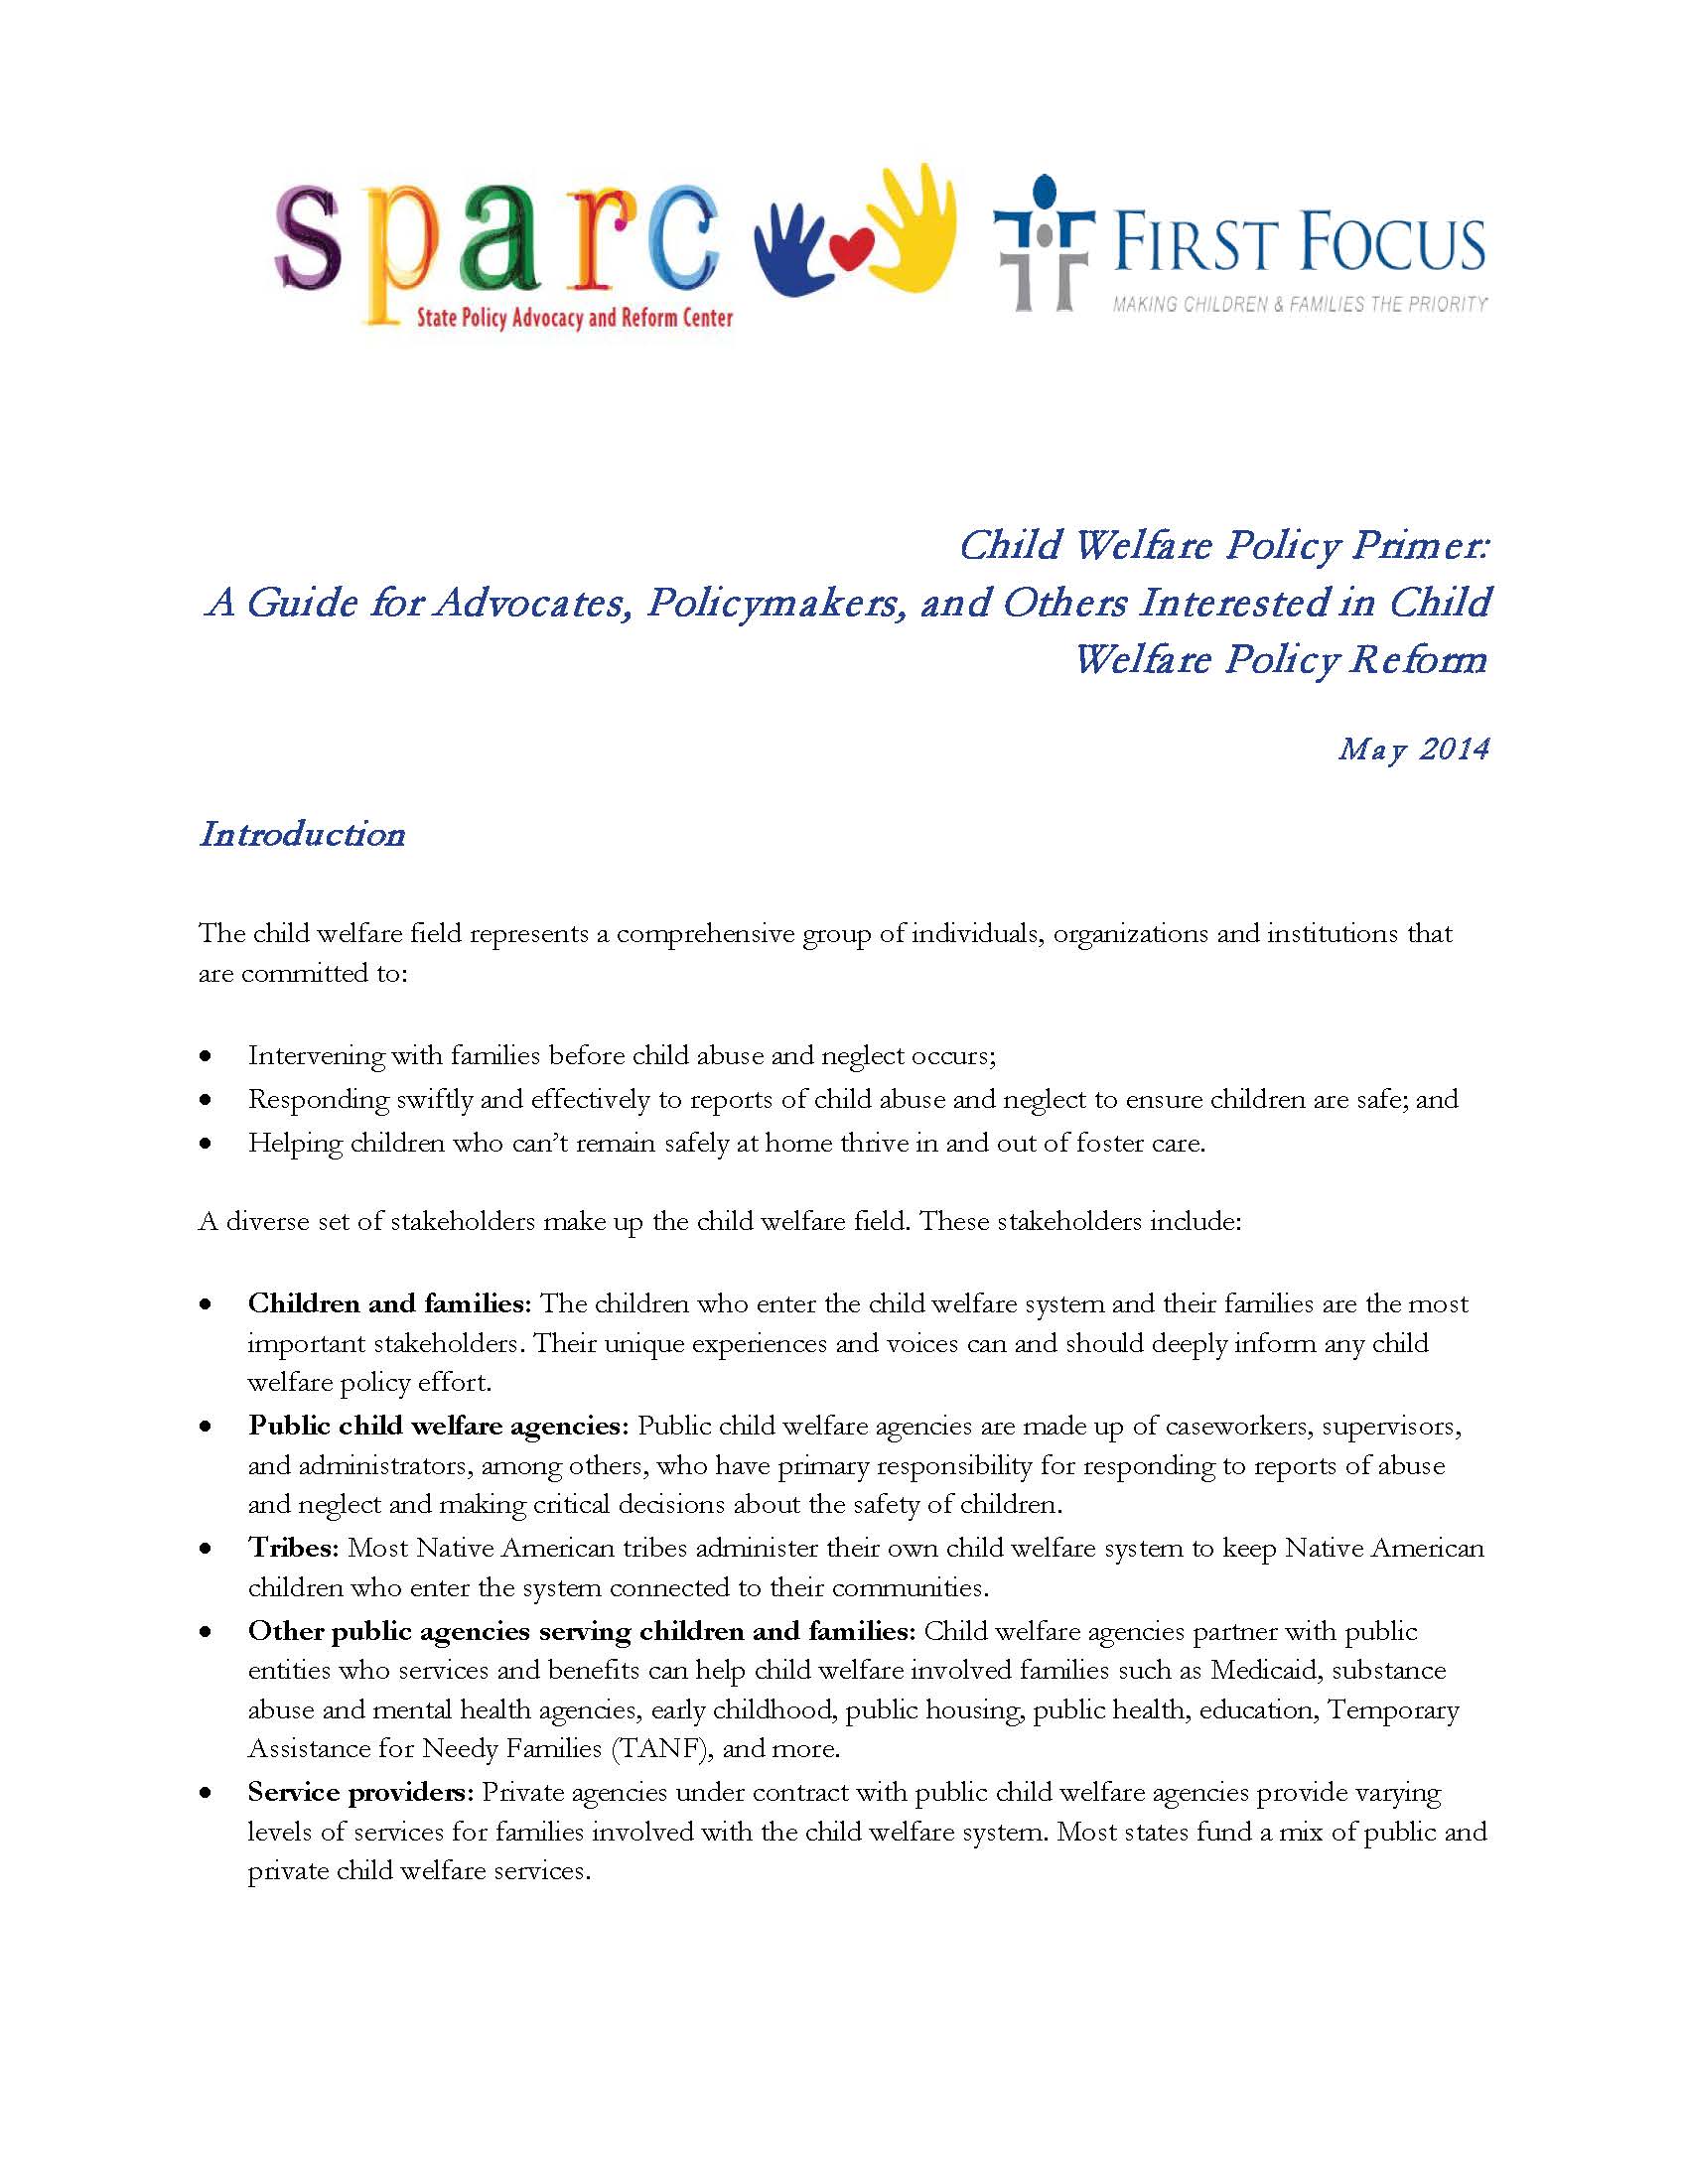 Child Welfare Policy Primer: A Guide for Advocates, Policymakers, and Others Interested in Child Welfare Policy Reform